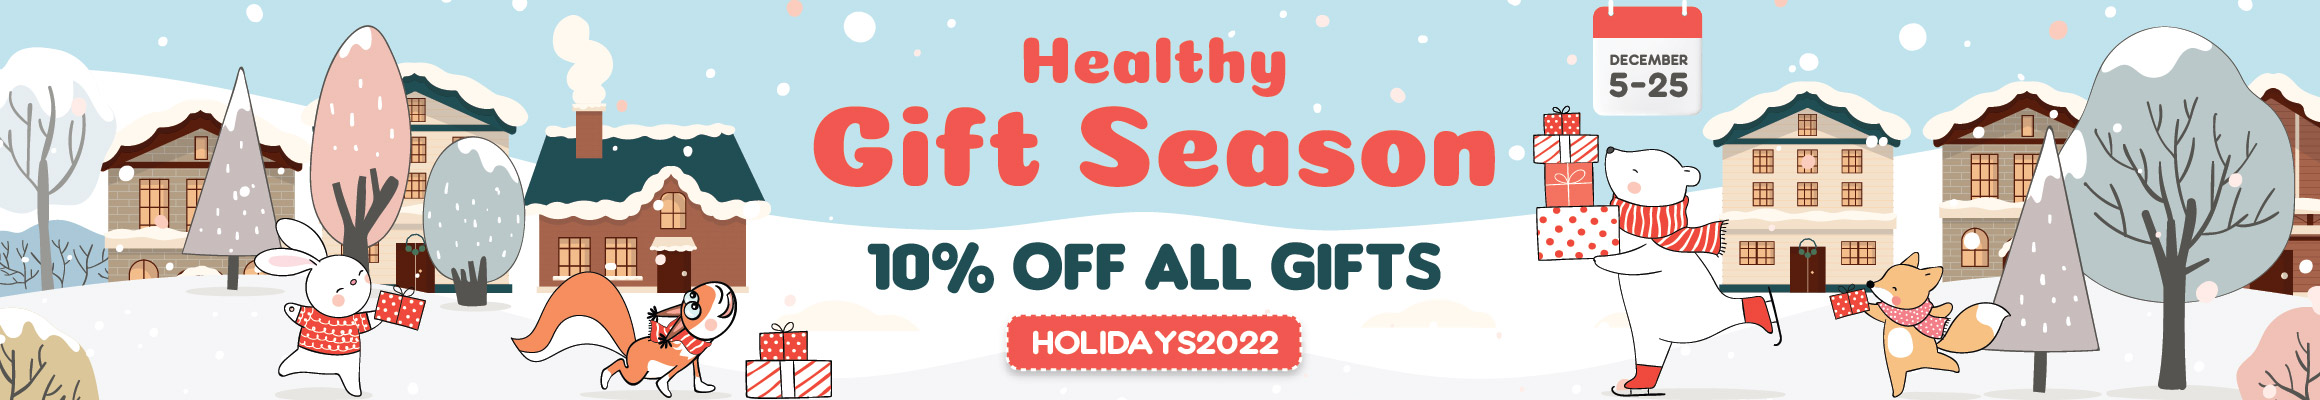 10% OFF ALL GIFTS use promocode holidays2022